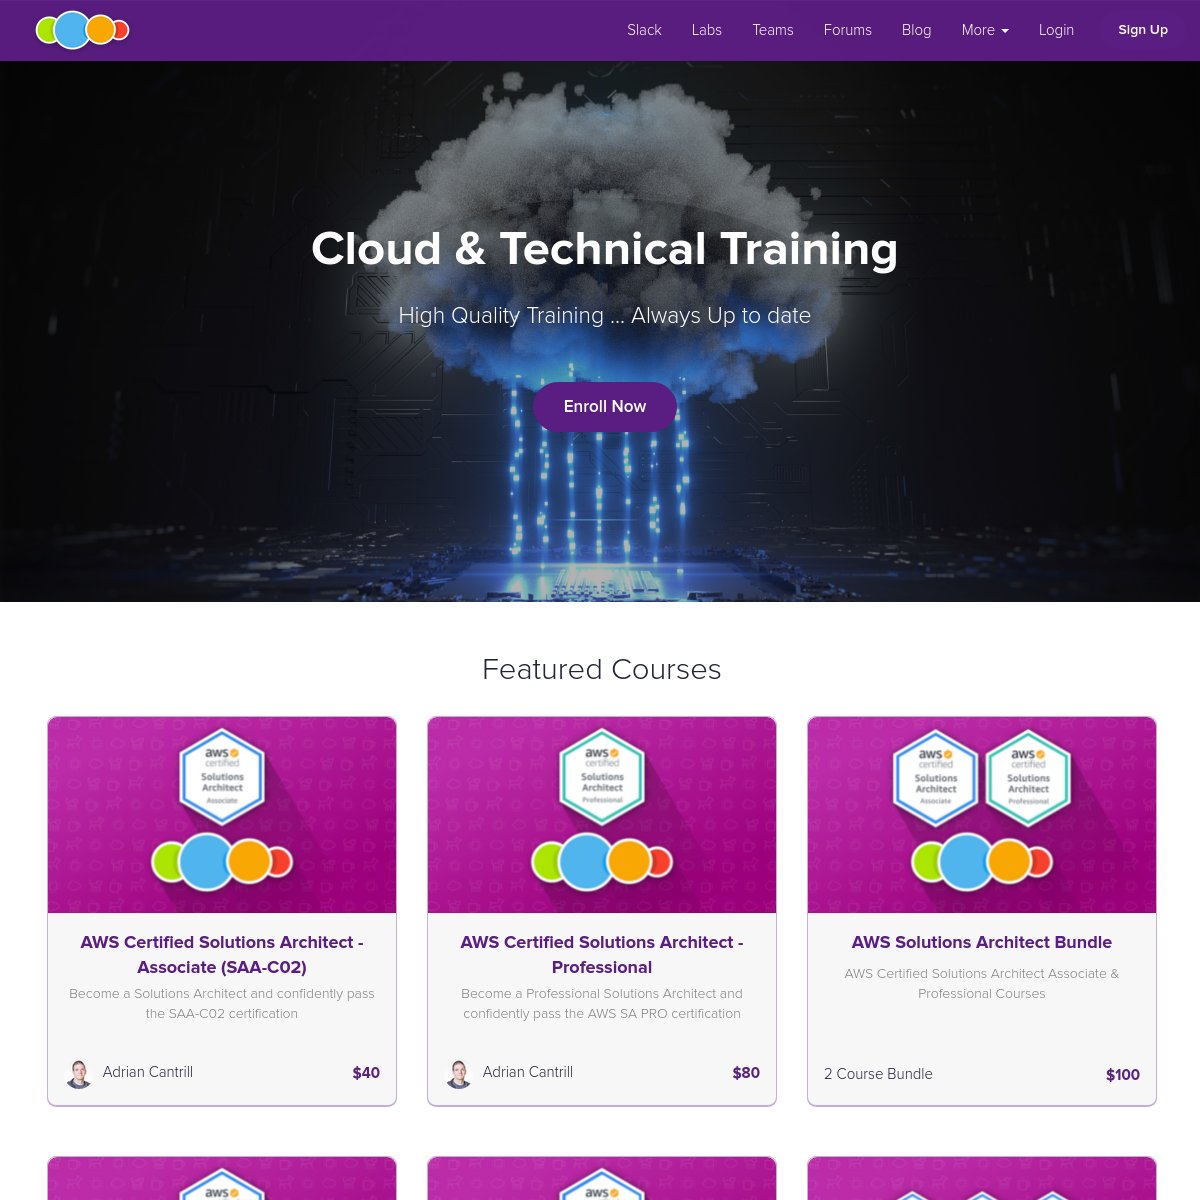 ⚡⚡⚡ Trending venue ⚡⚡⚡ learn.cantrill.io Online training content for Amazon Web Services - we accept BTC and LN at btcpay.cantrill.io LightningNetworkStores.com/e/cantrill.io #LN #btc #lightning #bitcoin #bitcoinLNS #LightningNetwork